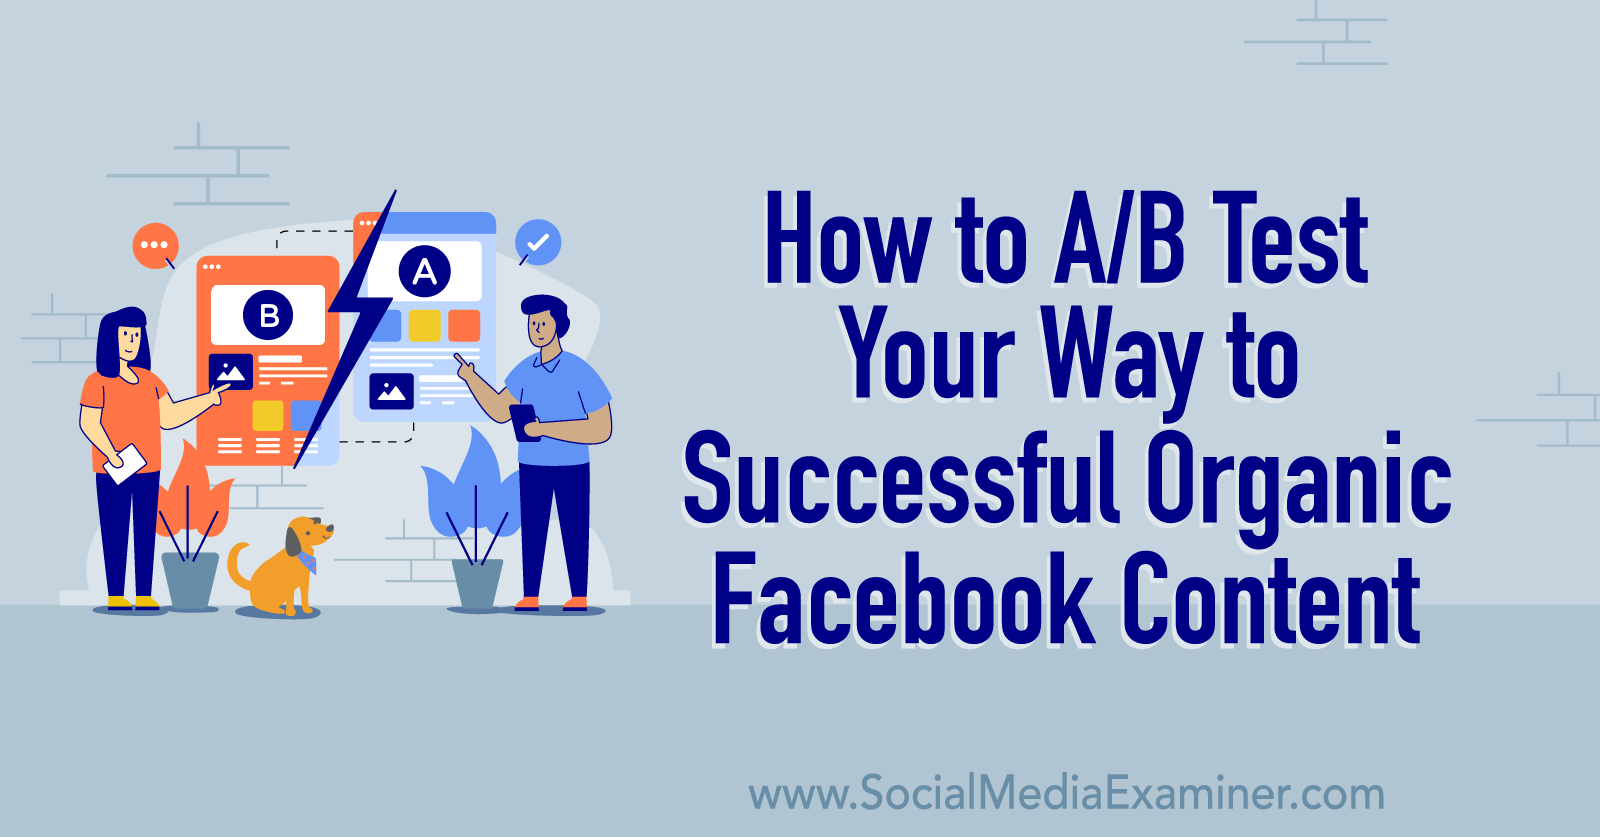 How to A/B Test Your Way to Successful Organic Facebook Content by Social Media Examiner